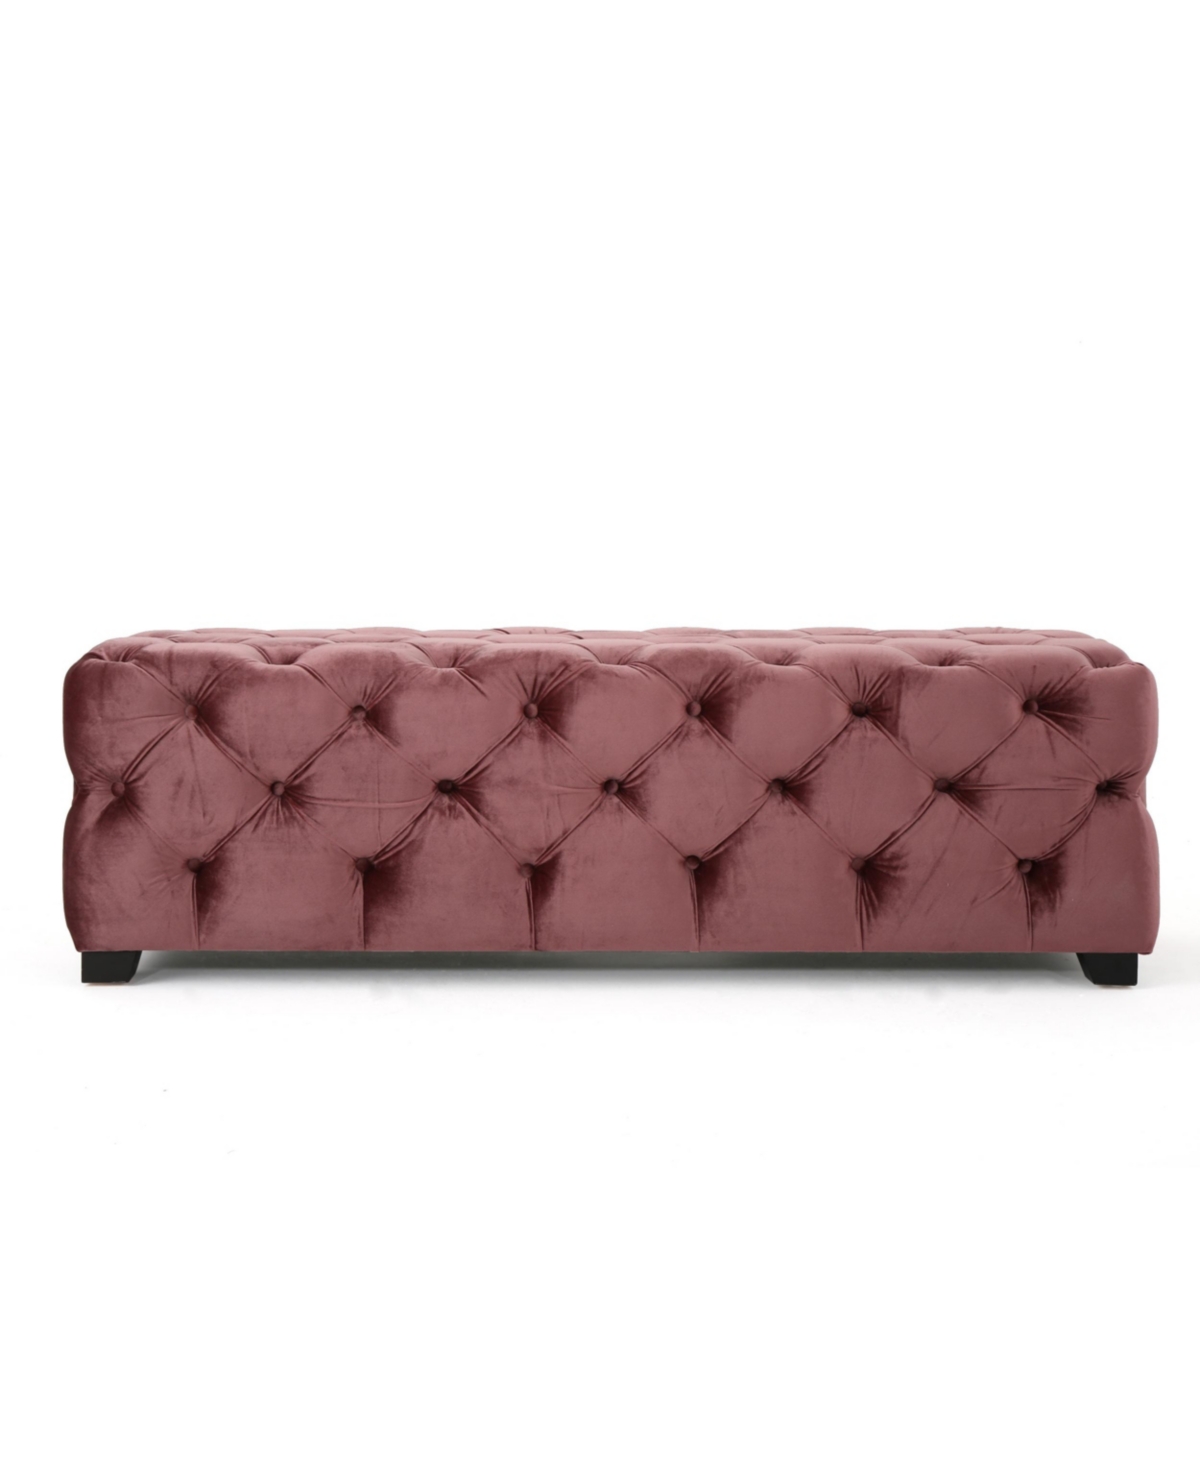 Noble House Piper Modern Glam Tufted Ottoman Bench In Blush